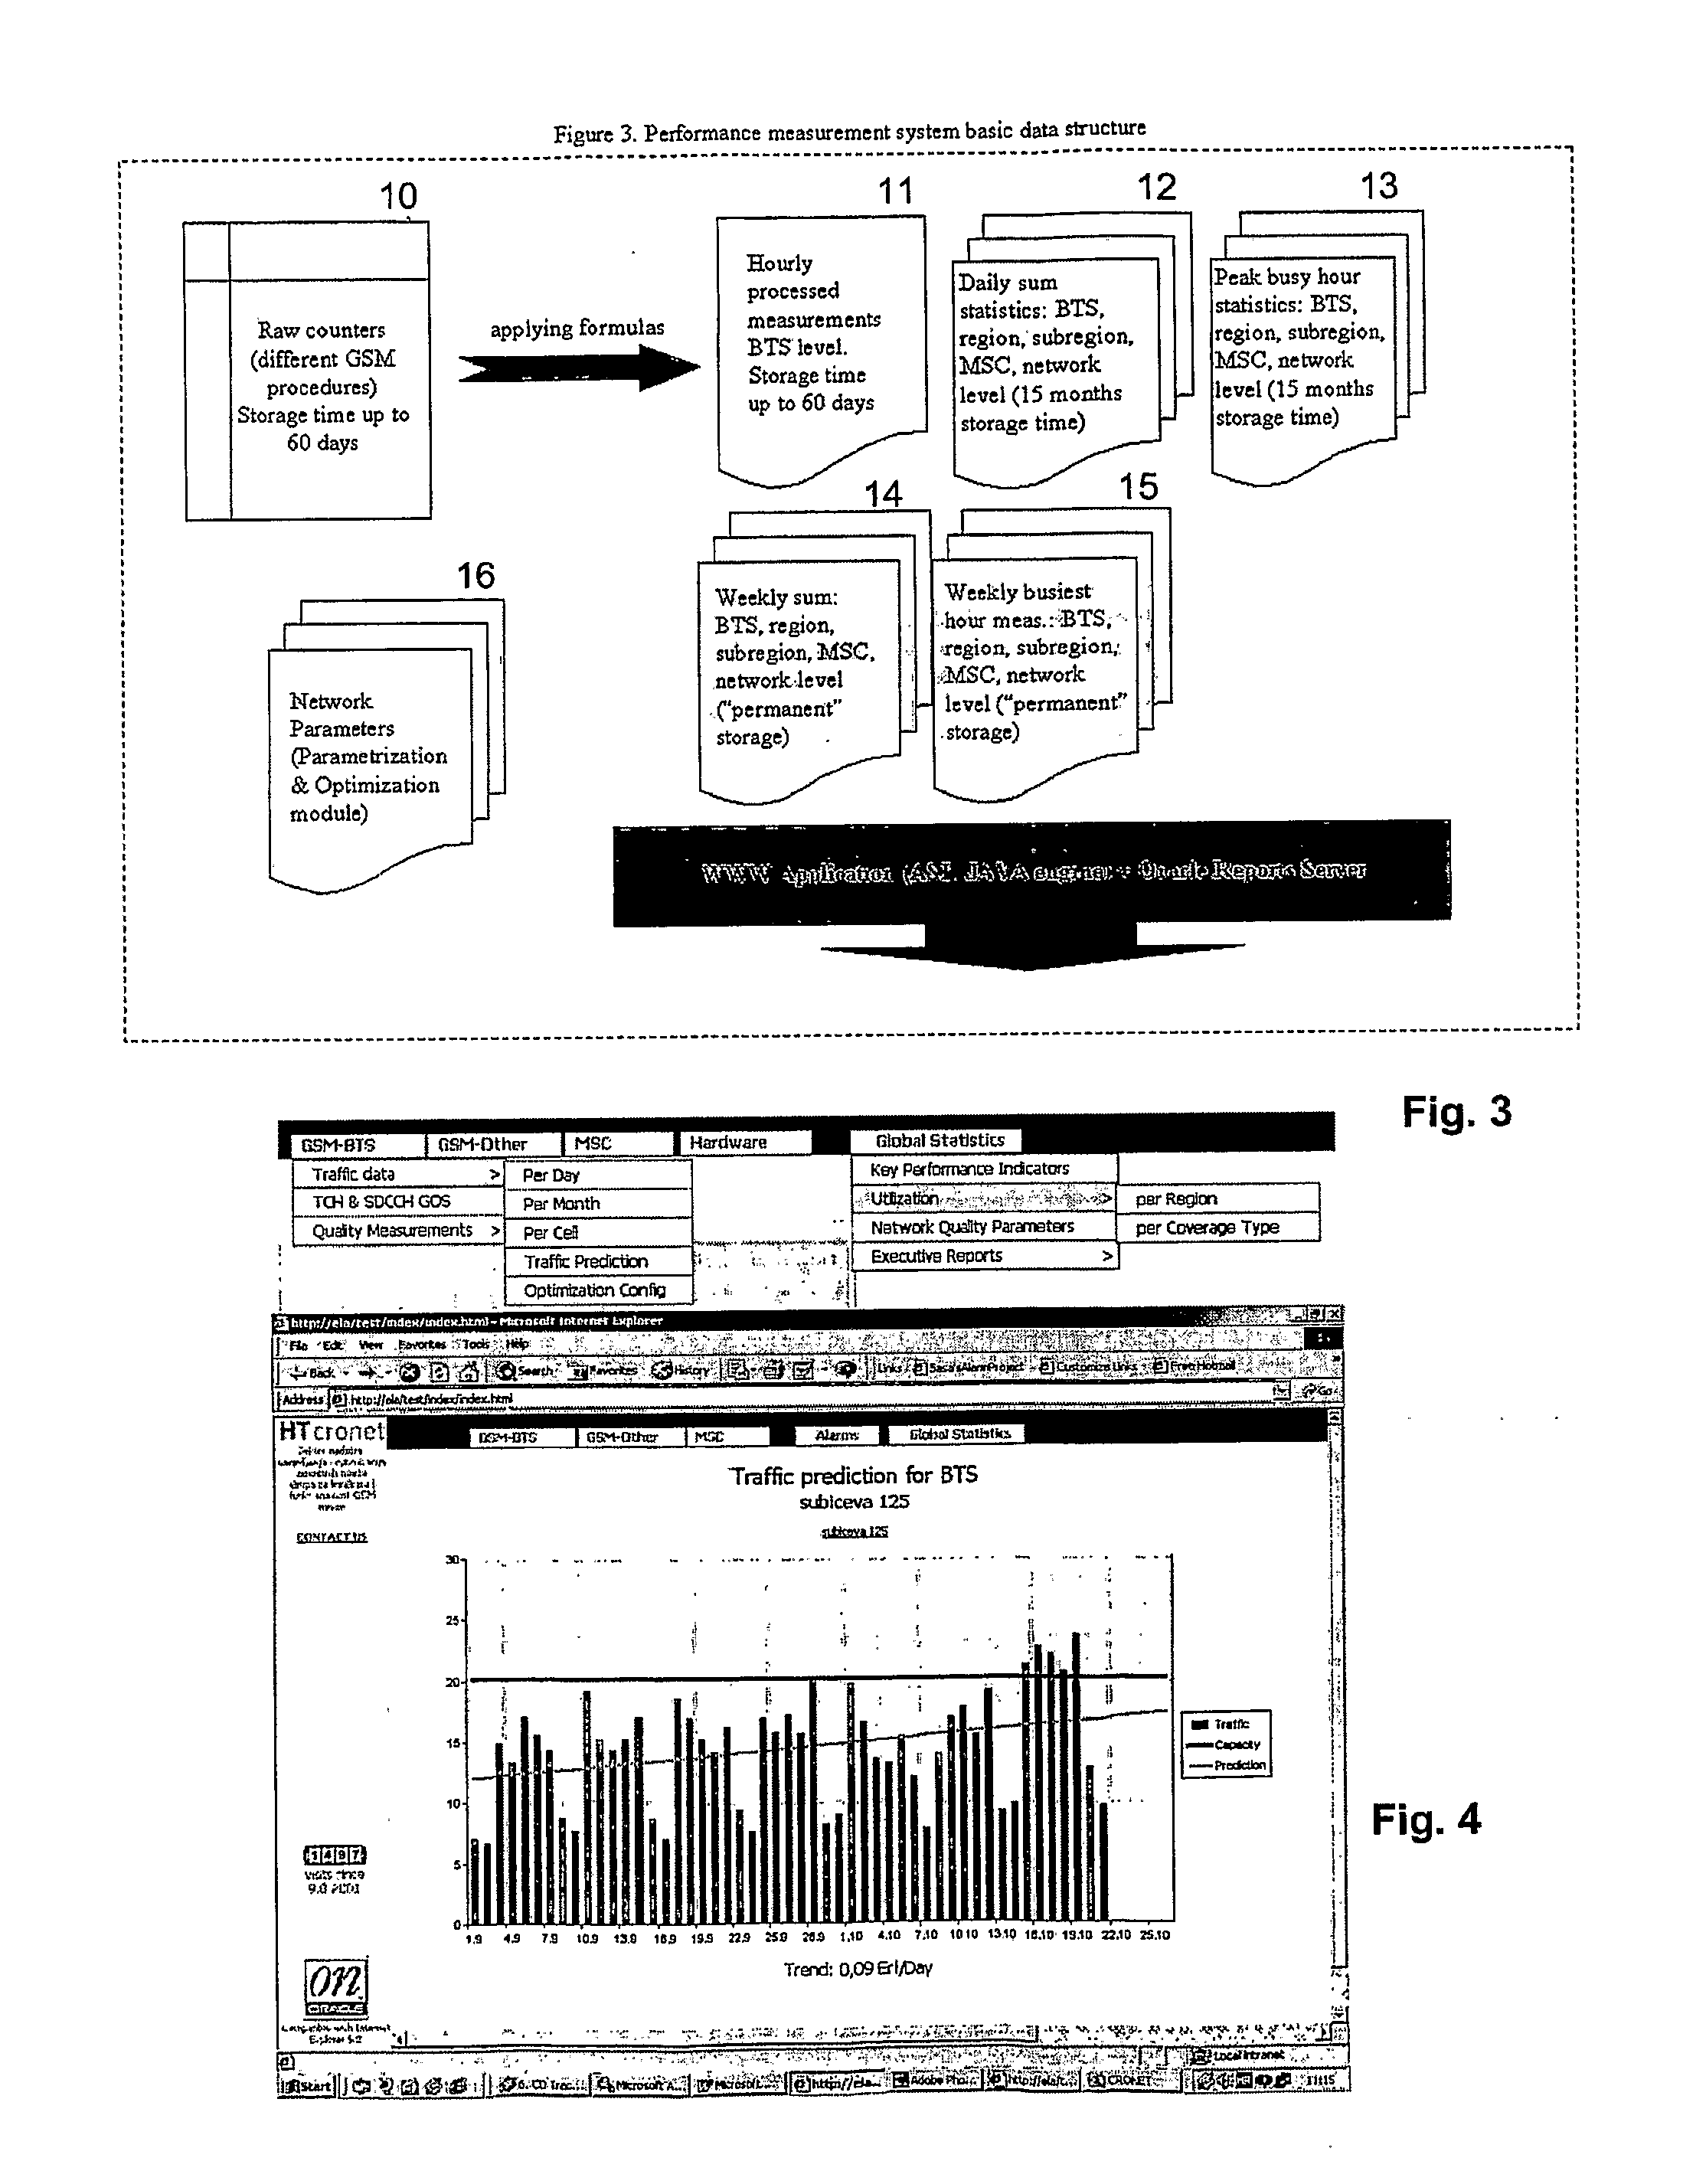 Base Station System Performance Measurement System in a GSM Radio Communication Network